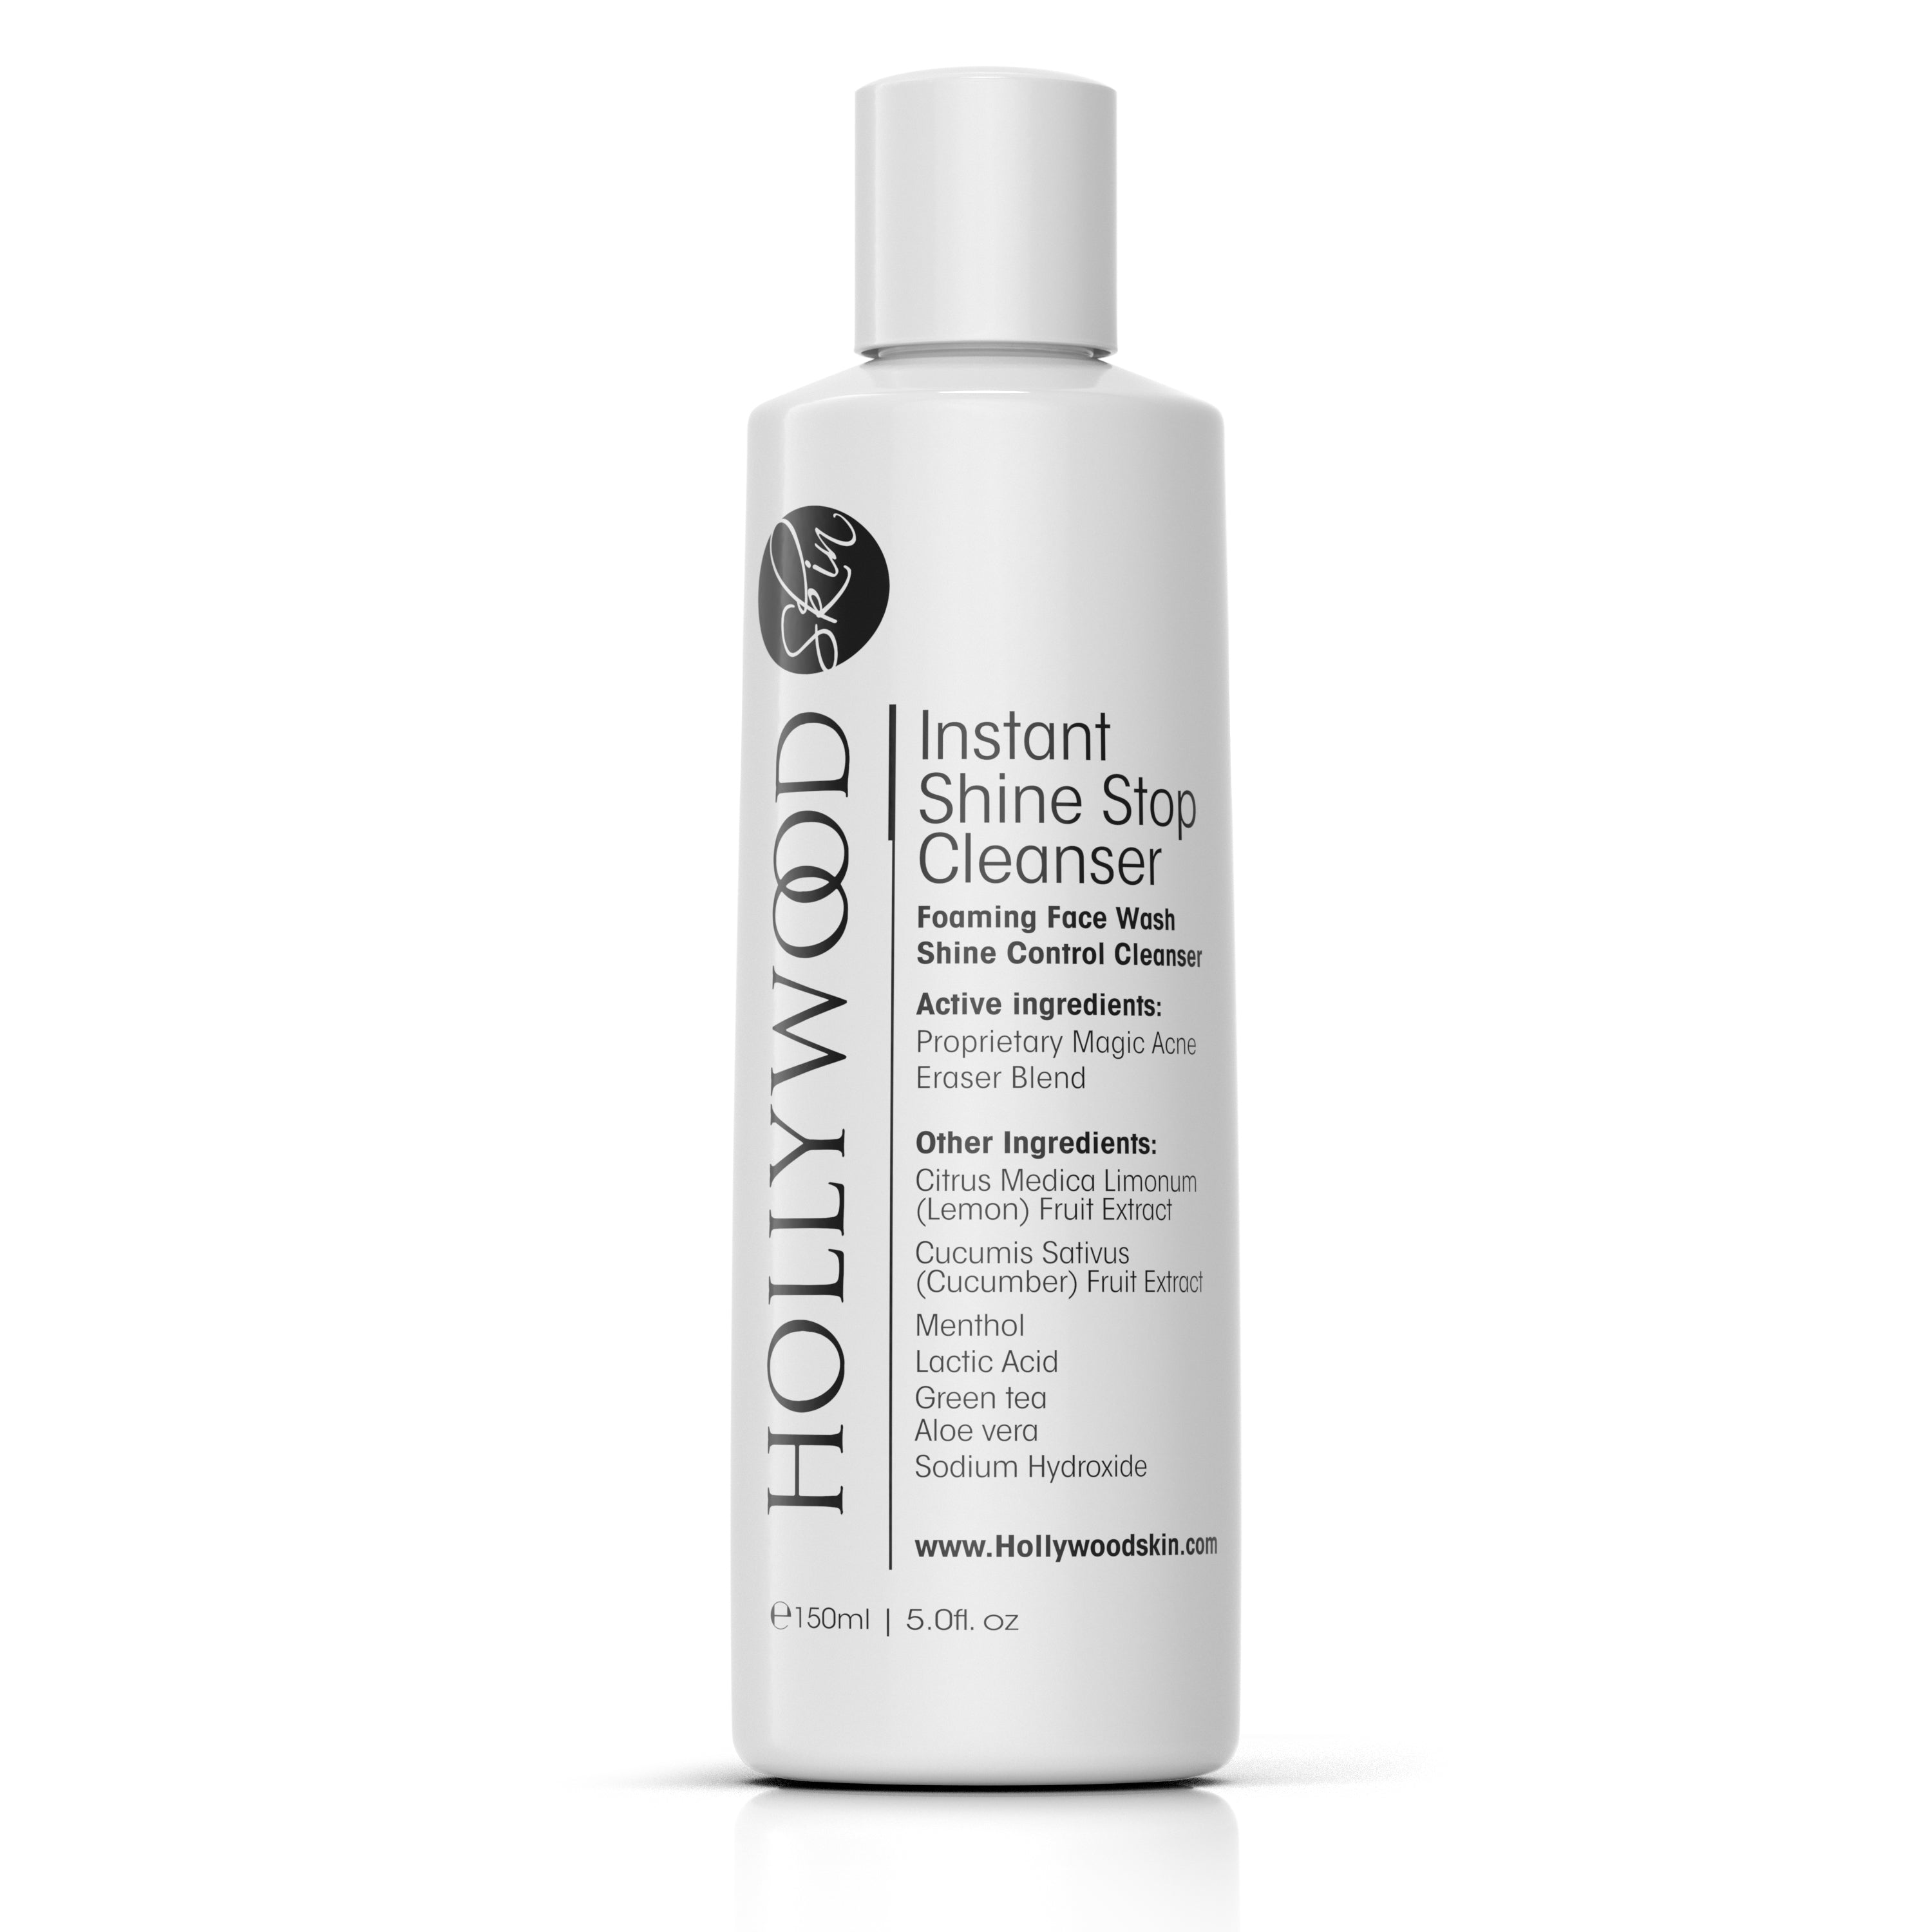 Instant shine stop cleanser